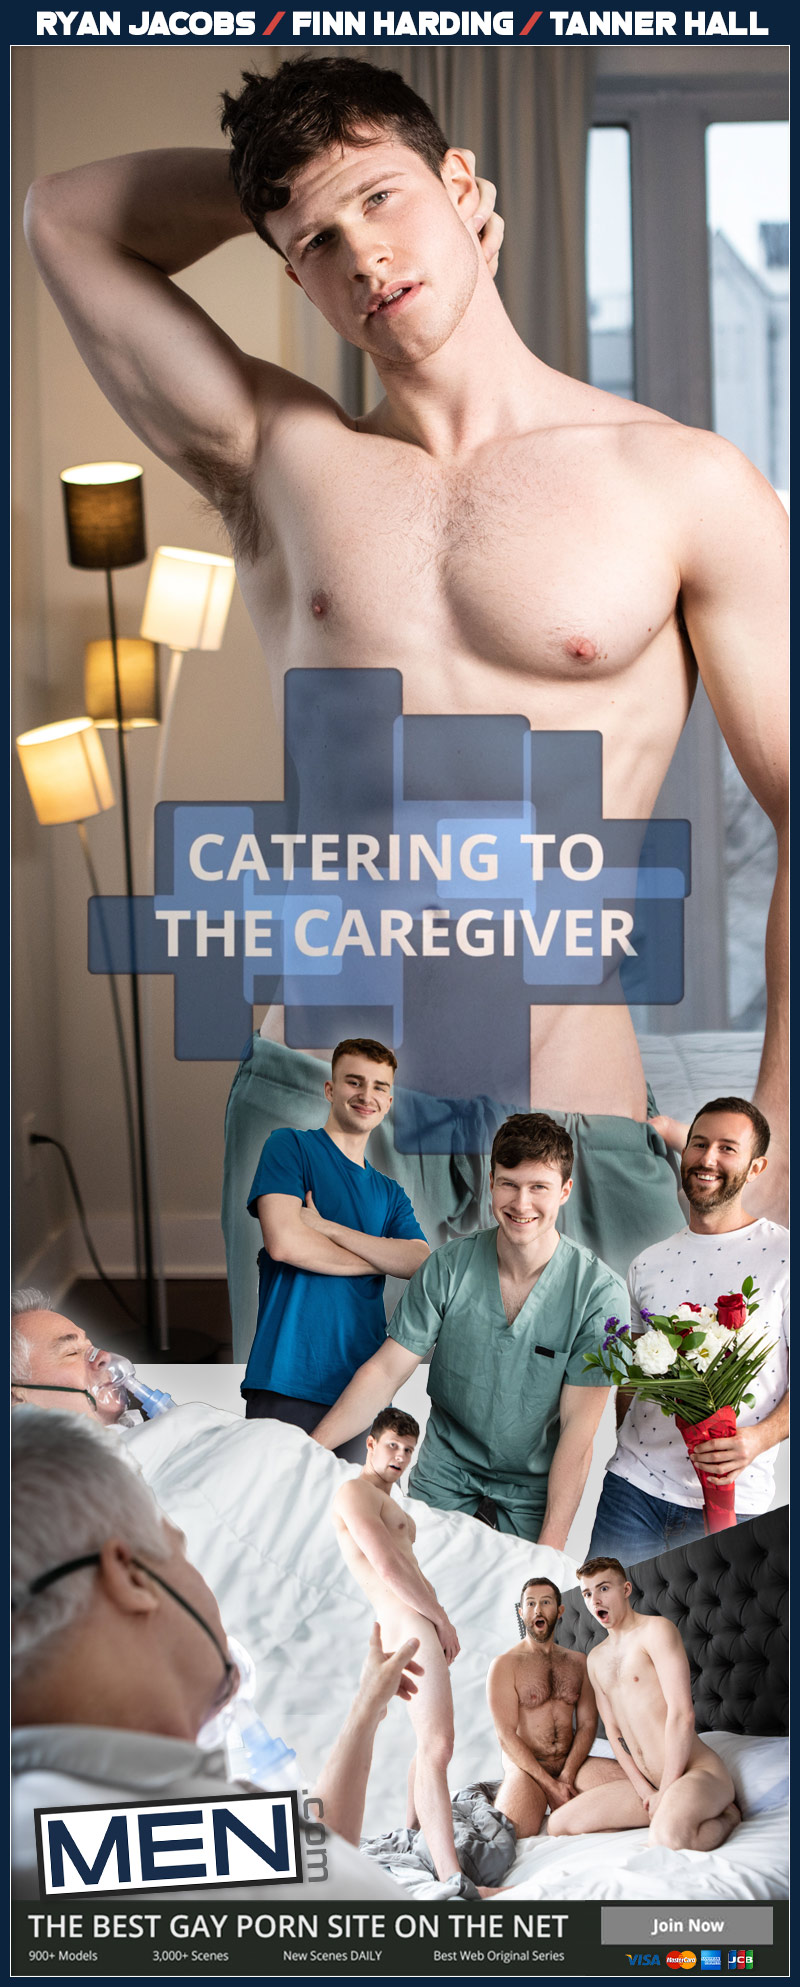 Catering to the Caregiver (New Exclusive Finn Harding Fucks Ryan Jacobs and Tanner Hall) at MEN.com